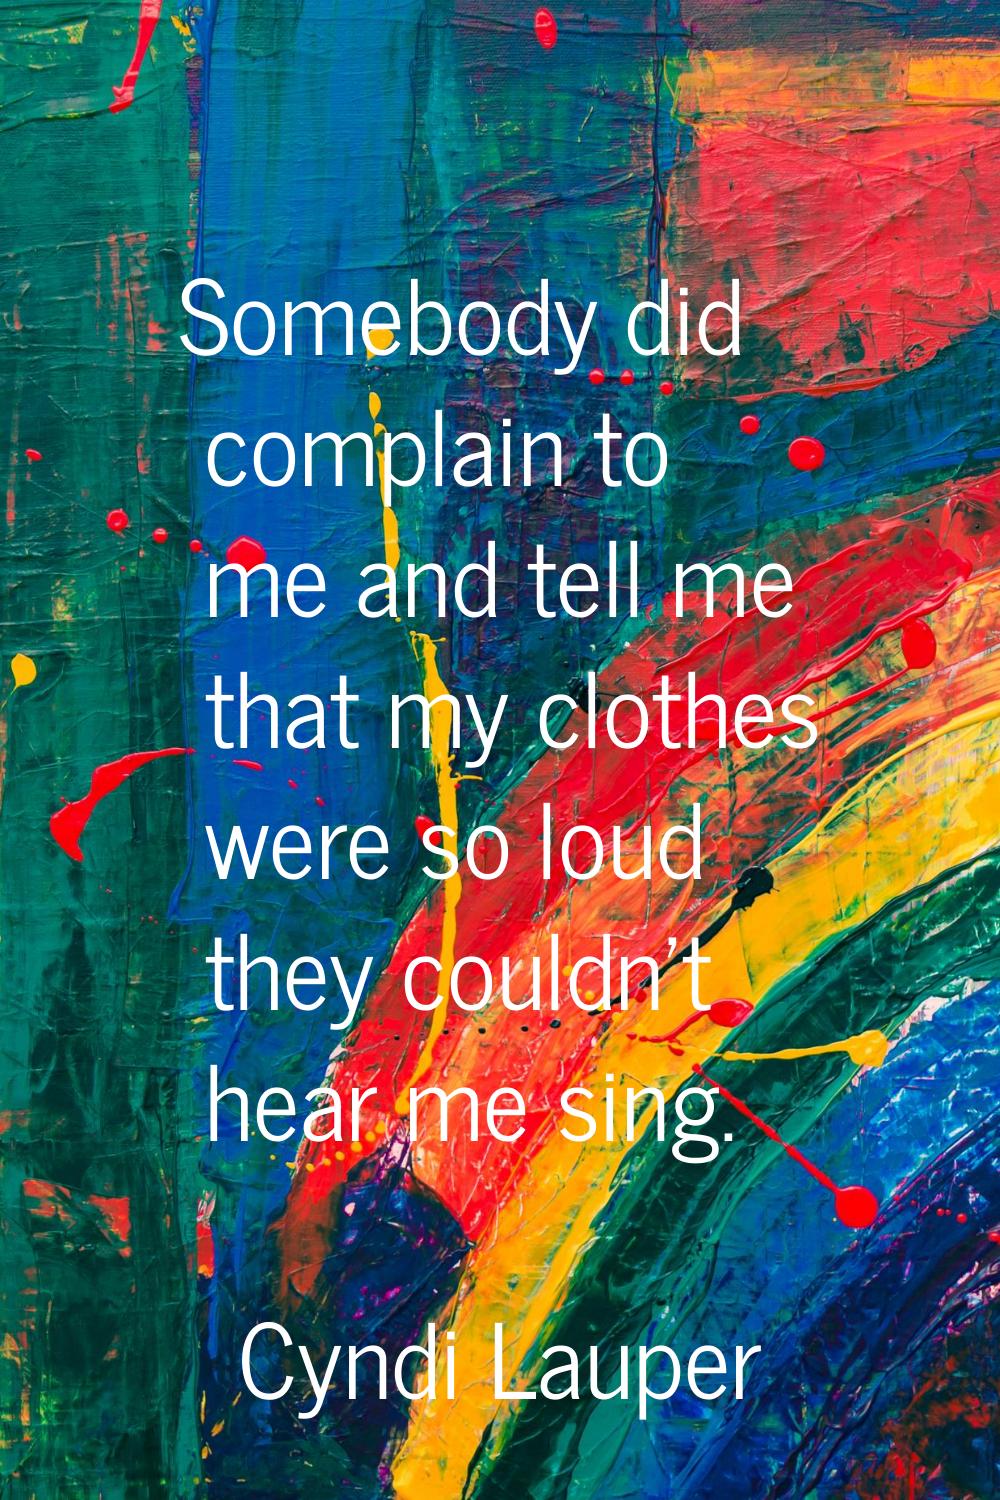 Somebody did complain to me and tell me that my clothes were so loud they couldn't hear me sing.